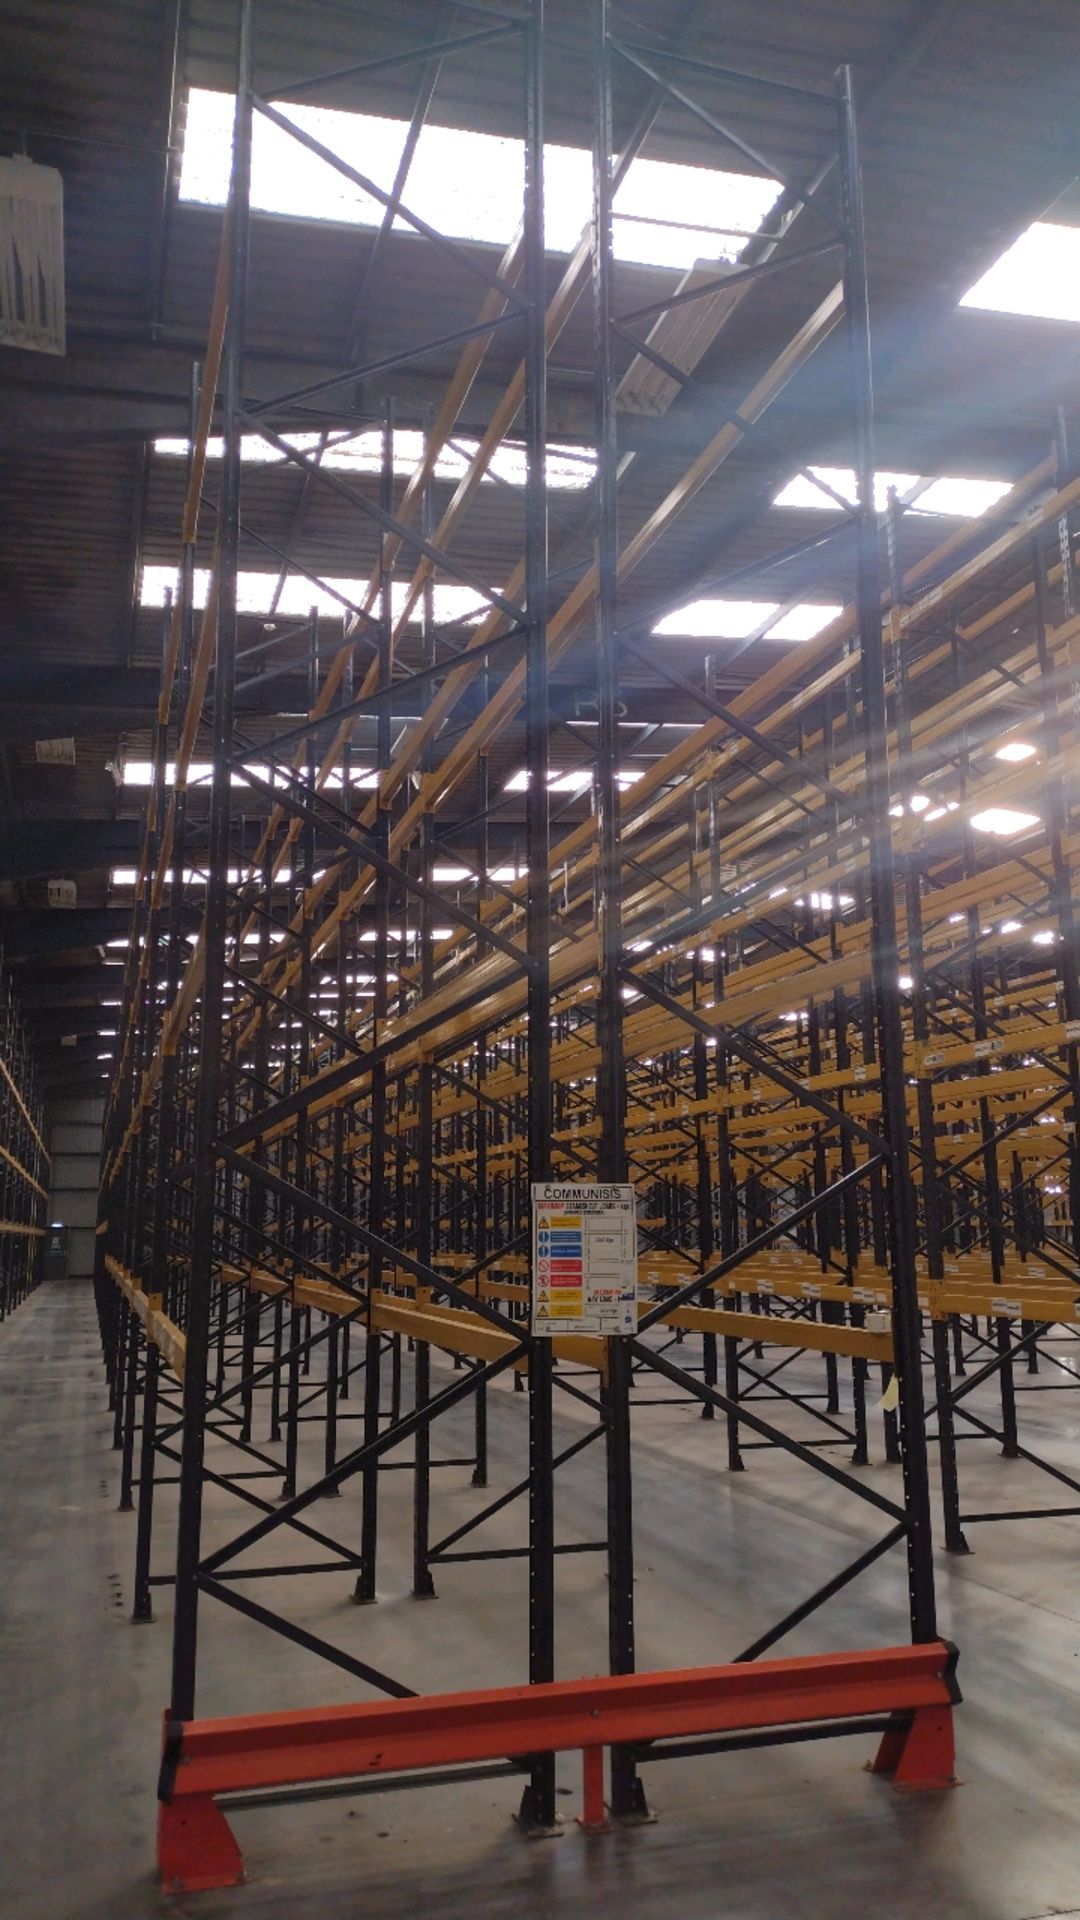 40 Bays Of Back To Back Boltless Industrial Pallet Racking - Image 5 of 10